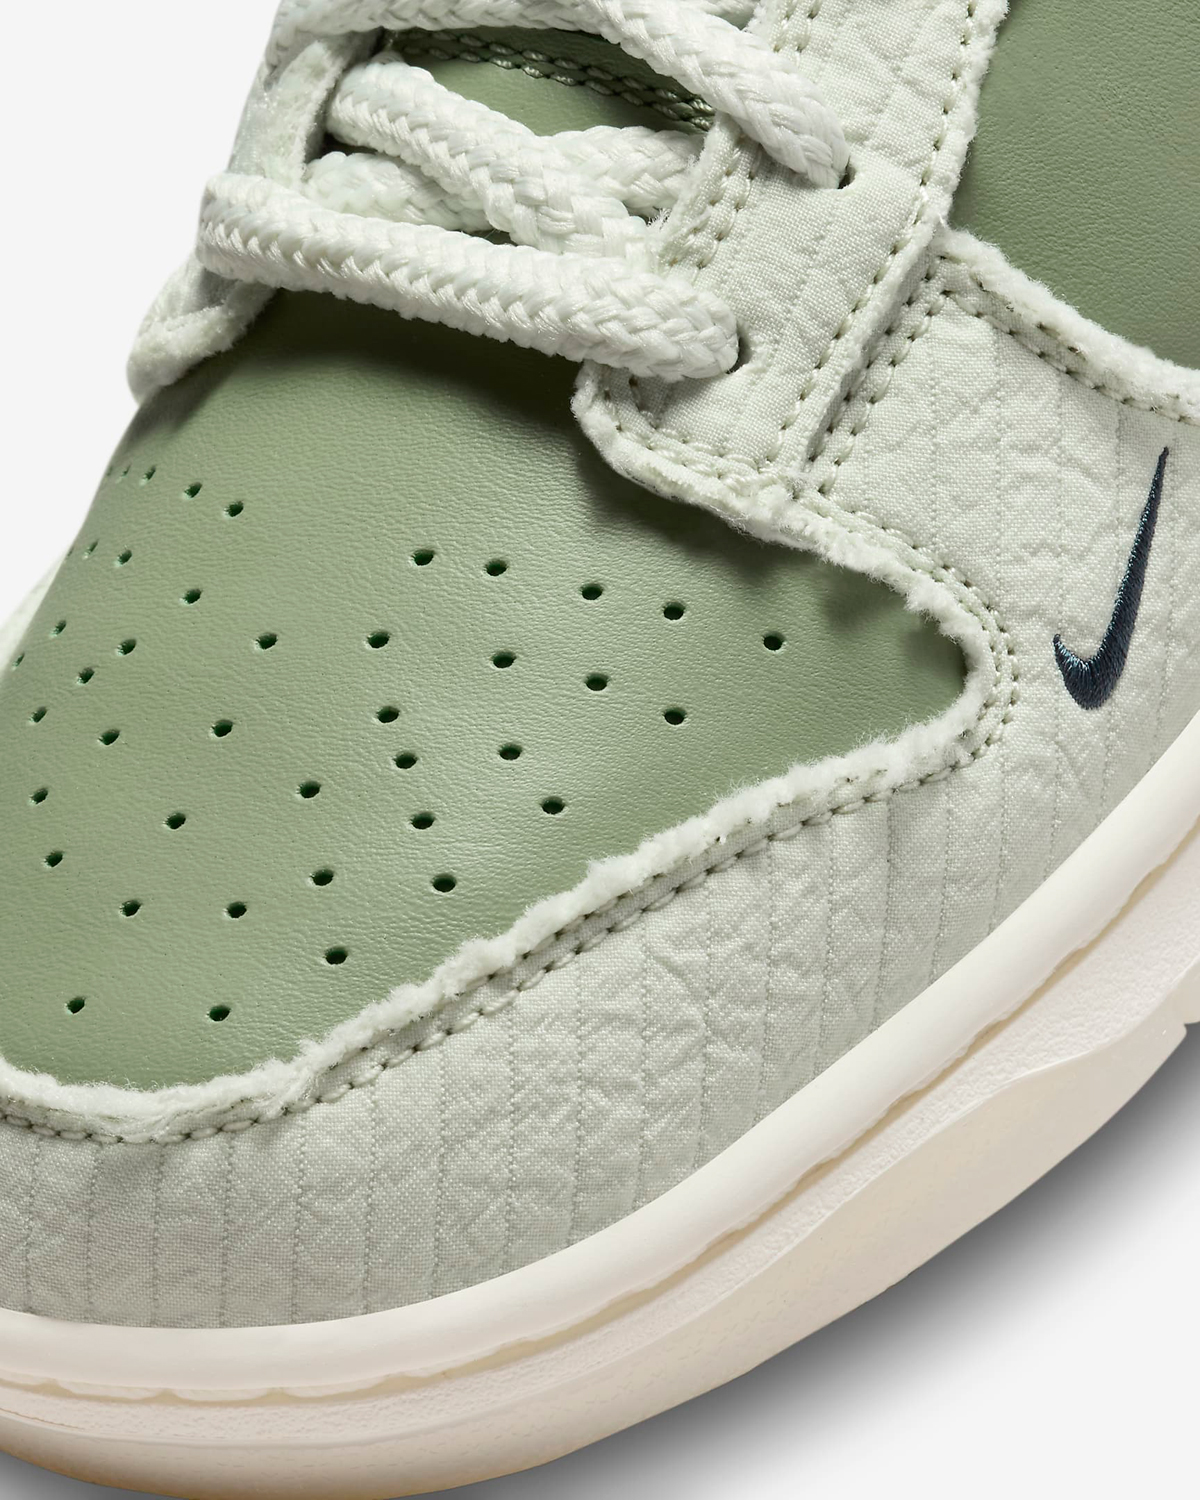 Nike-Dunk-Low-1-Of-One-Release-Date-7